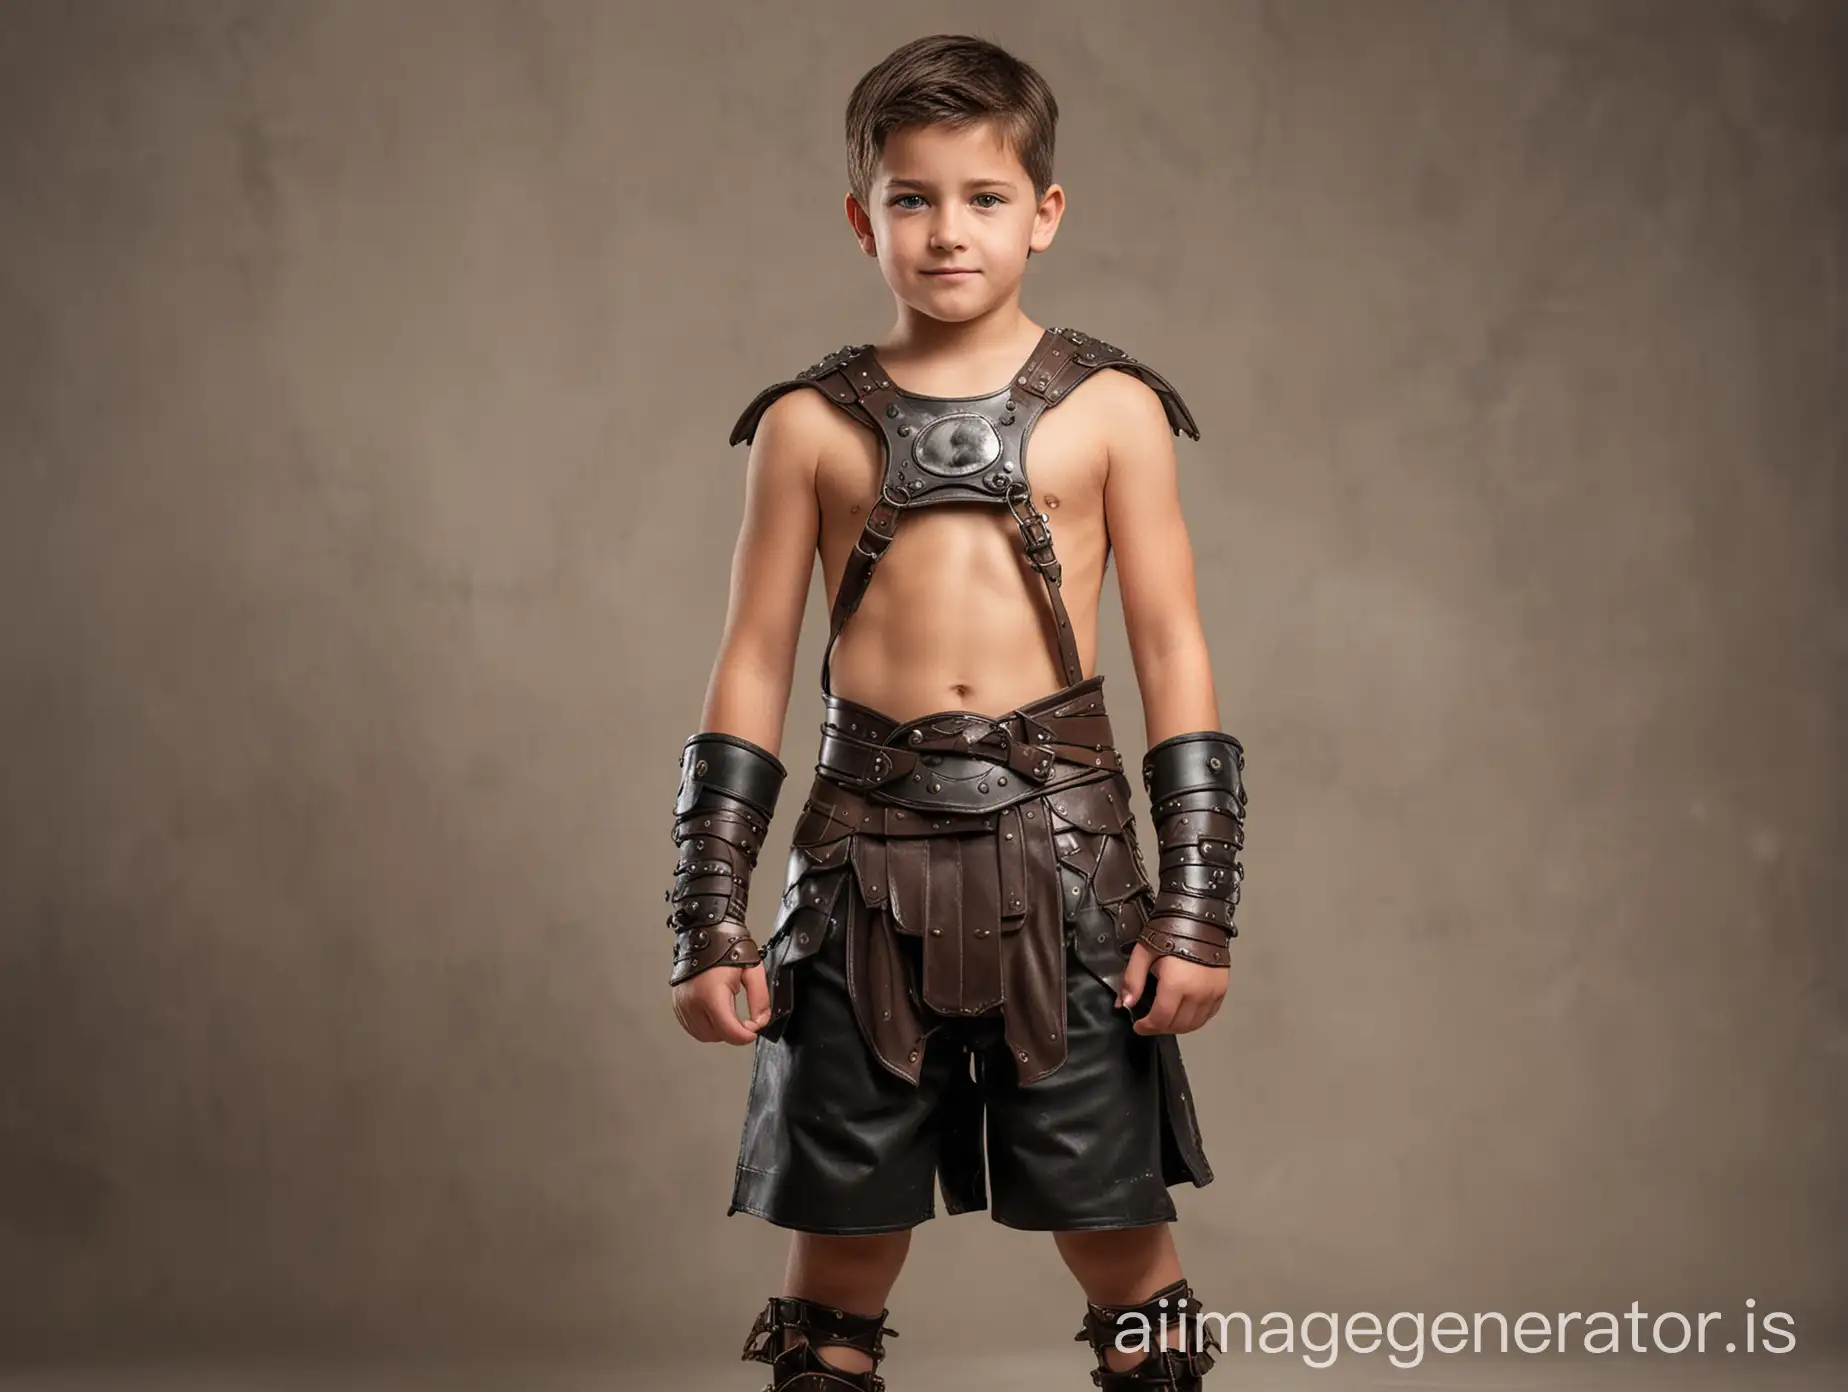 Strong-13YearOld-Boy-Villain-in-Gladiator-Outfit-with-Intimidating-Leather-and-Metal-Details